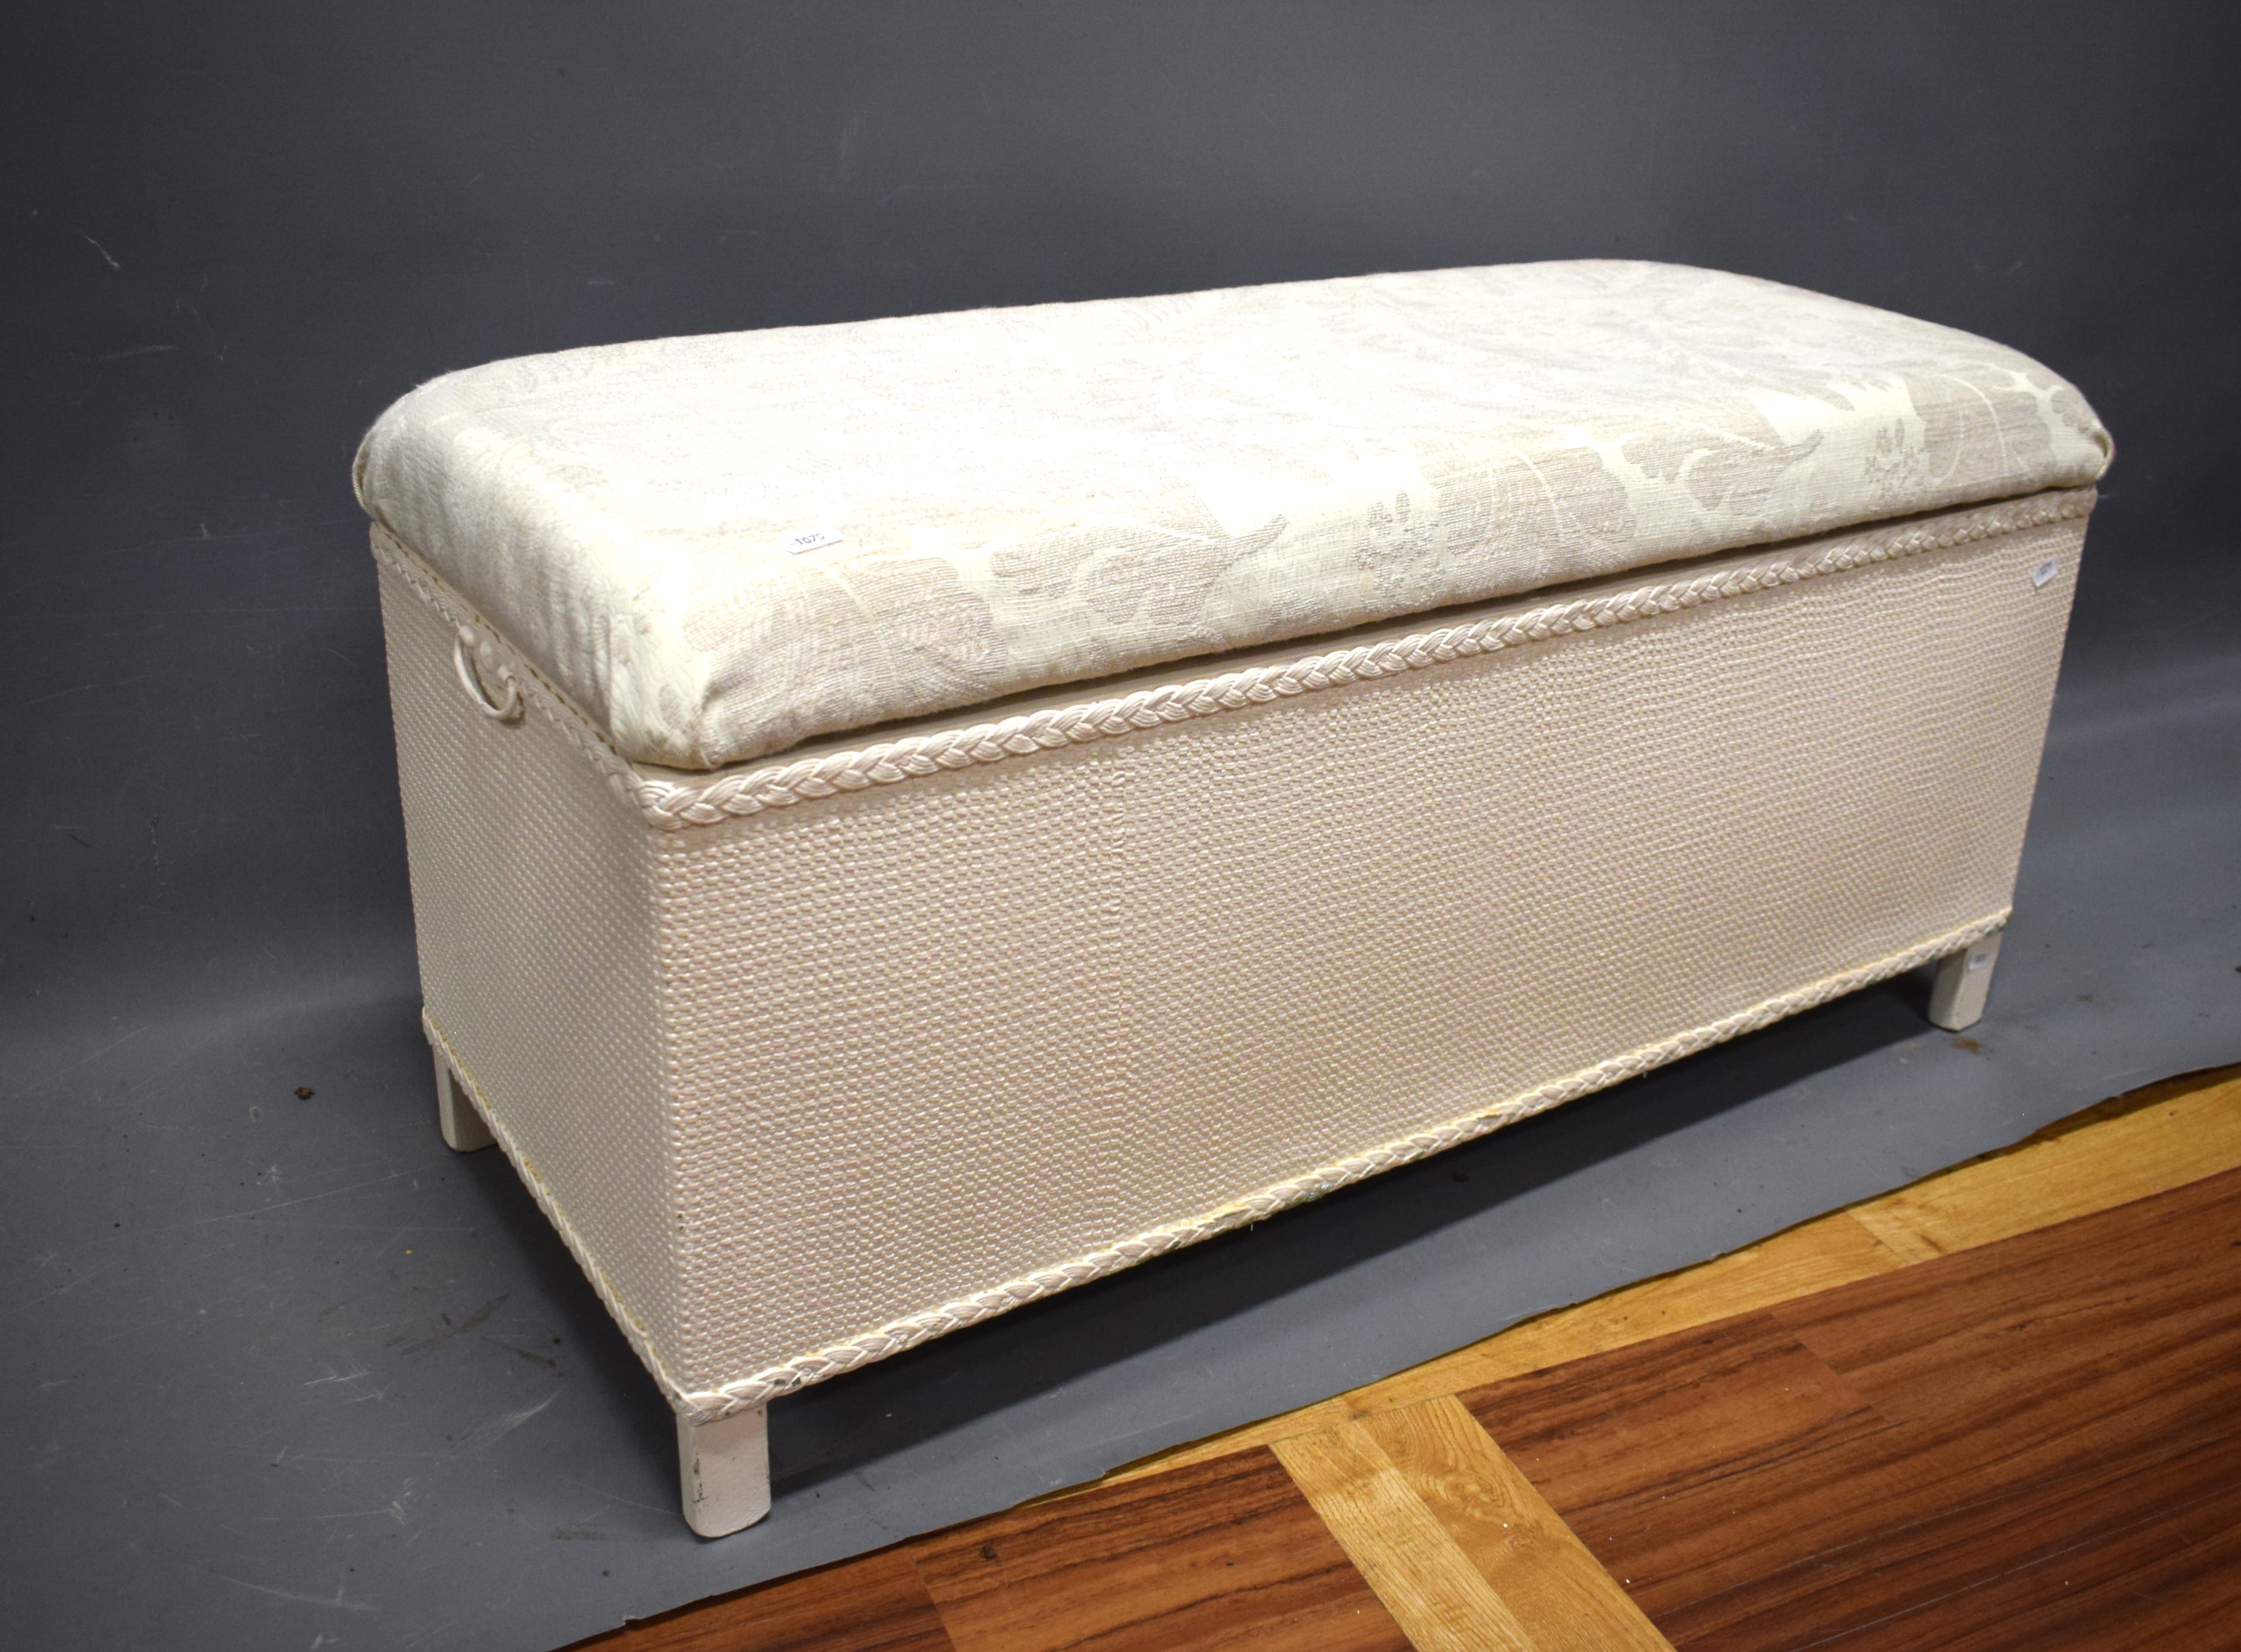 Lloyd loom style blanket box with linen top.   Measures H:18 x W:35 x D:15 Inches. See photos.   S2